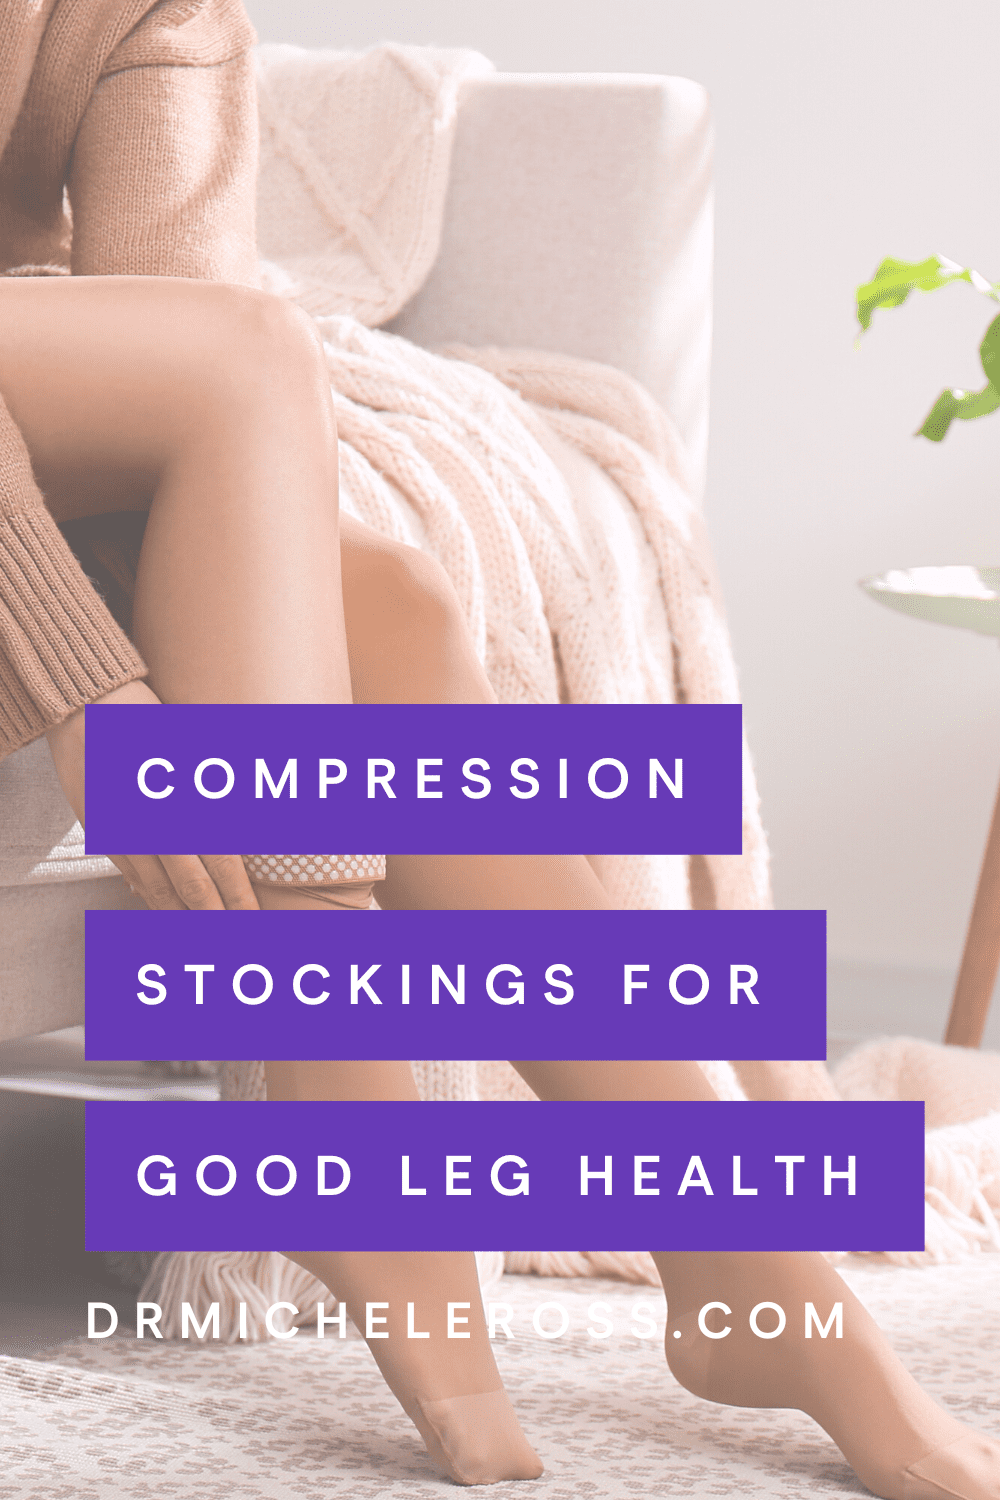 How to wear compression stockings spider vein treatment